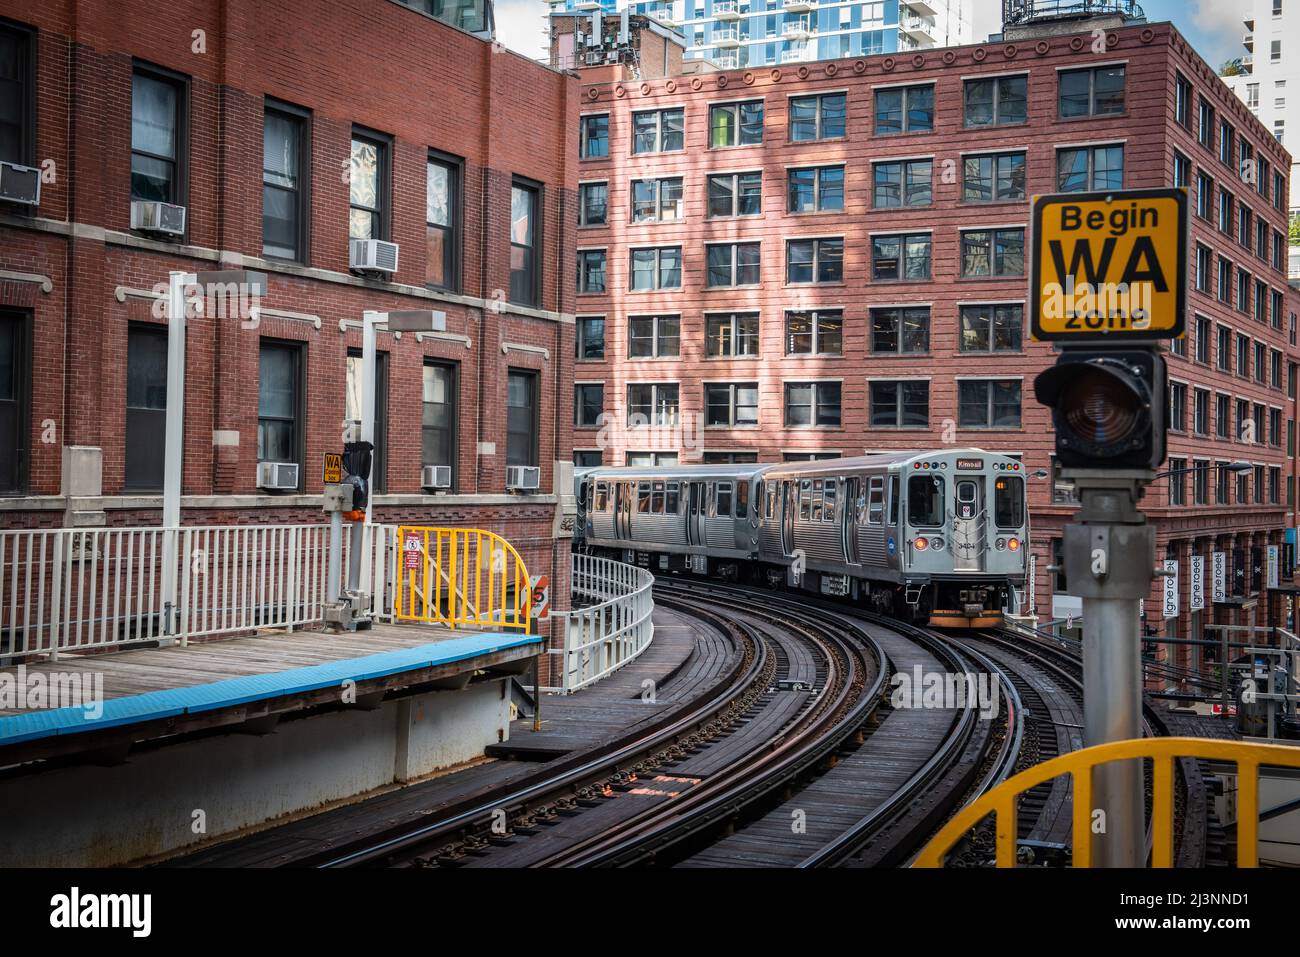 Chicago : October 11, 2018, Train on elevated tracks within buildings at the Loop, Glass and Steel bridge between buildings - Chicago City Center - Ch Stock Photo